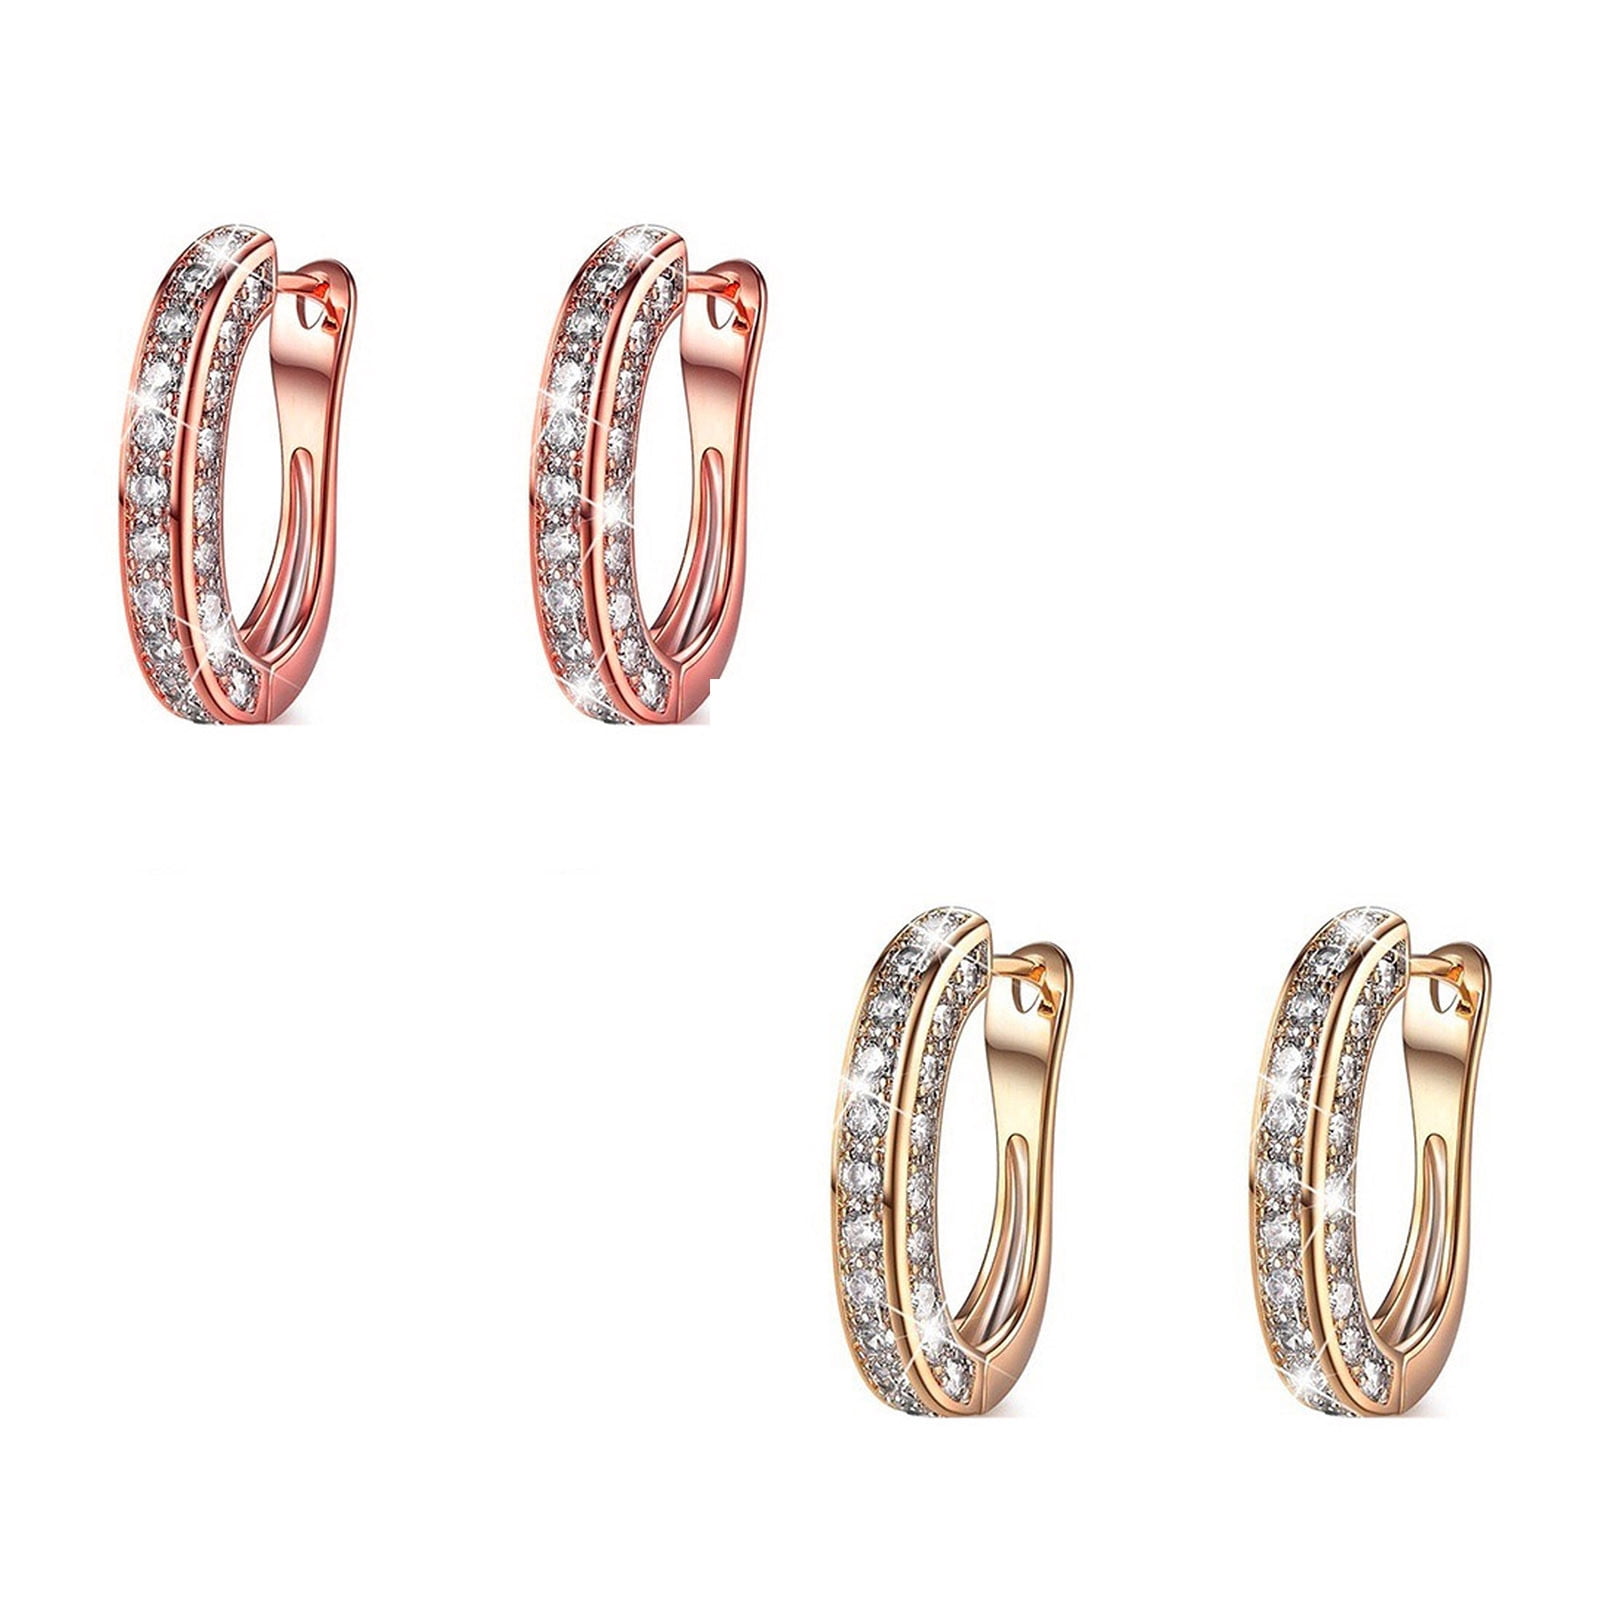 Colorful CZ Crystal Hoop Earrings For Women Gold Round Stud Party Bens,  Perfect Christmas Or Birthday Gift Wholesale Jewelry J230529 From  Us_missouri, $5.02 | DHgate.Com